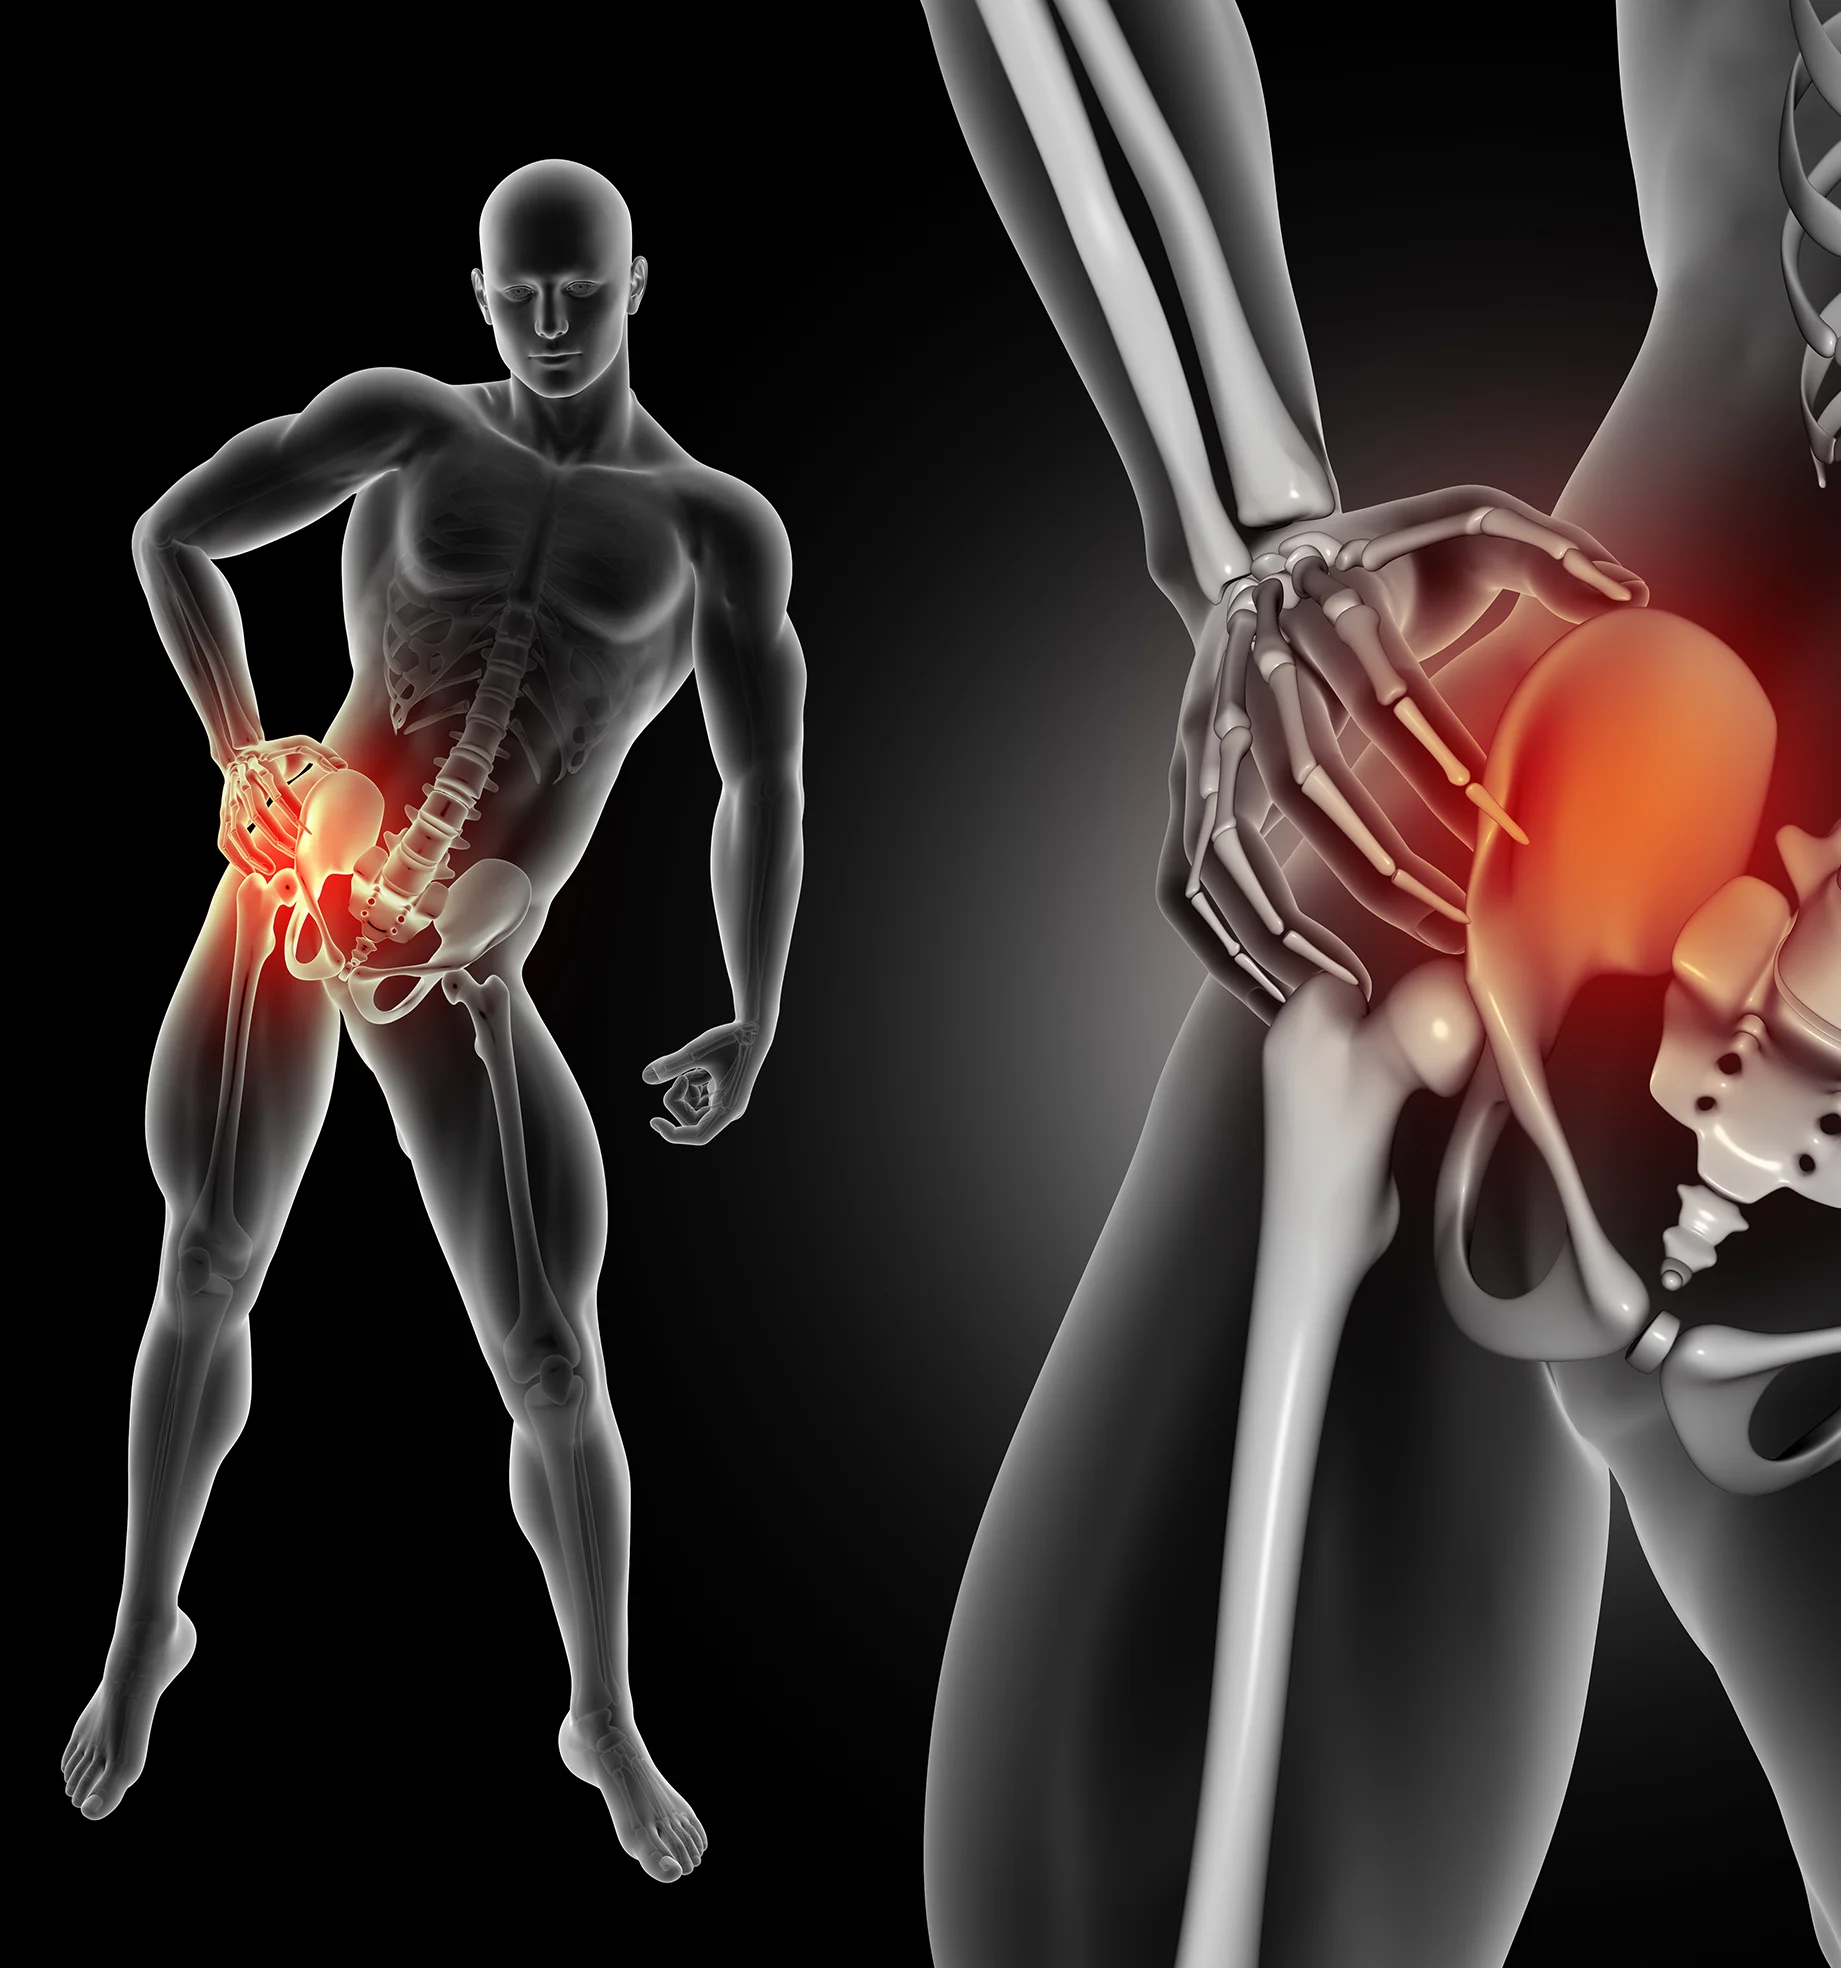 Best Treatment Joint Replacement and Spine Surgery in Bareilly - Gangasheel Hospital